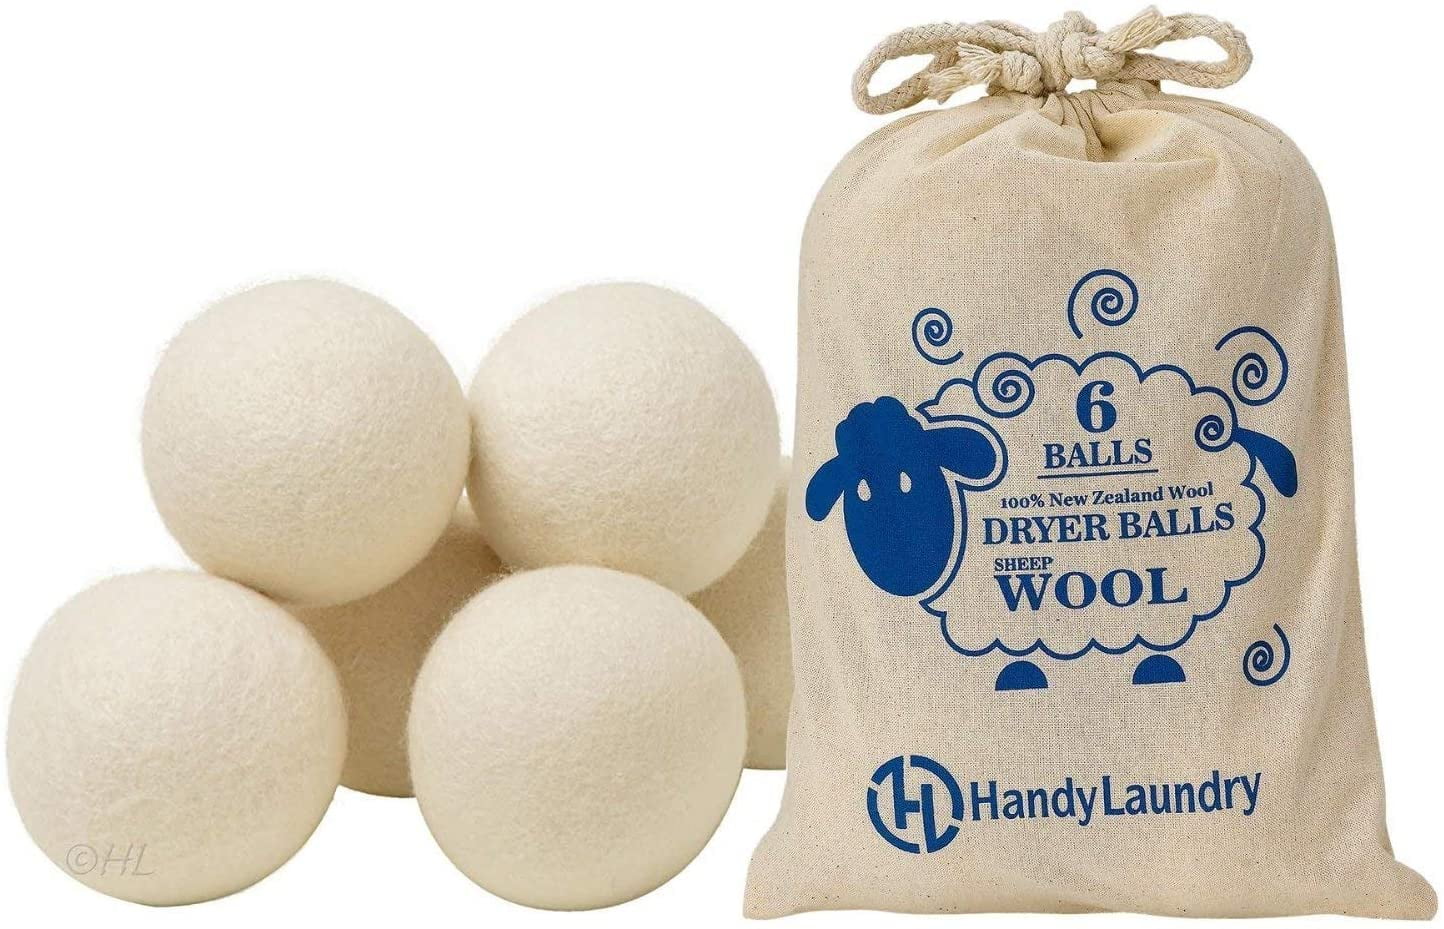 Reusable Laundry Clean Ball Practical Home Wool Dryer Balls Laundry SofteneYN 